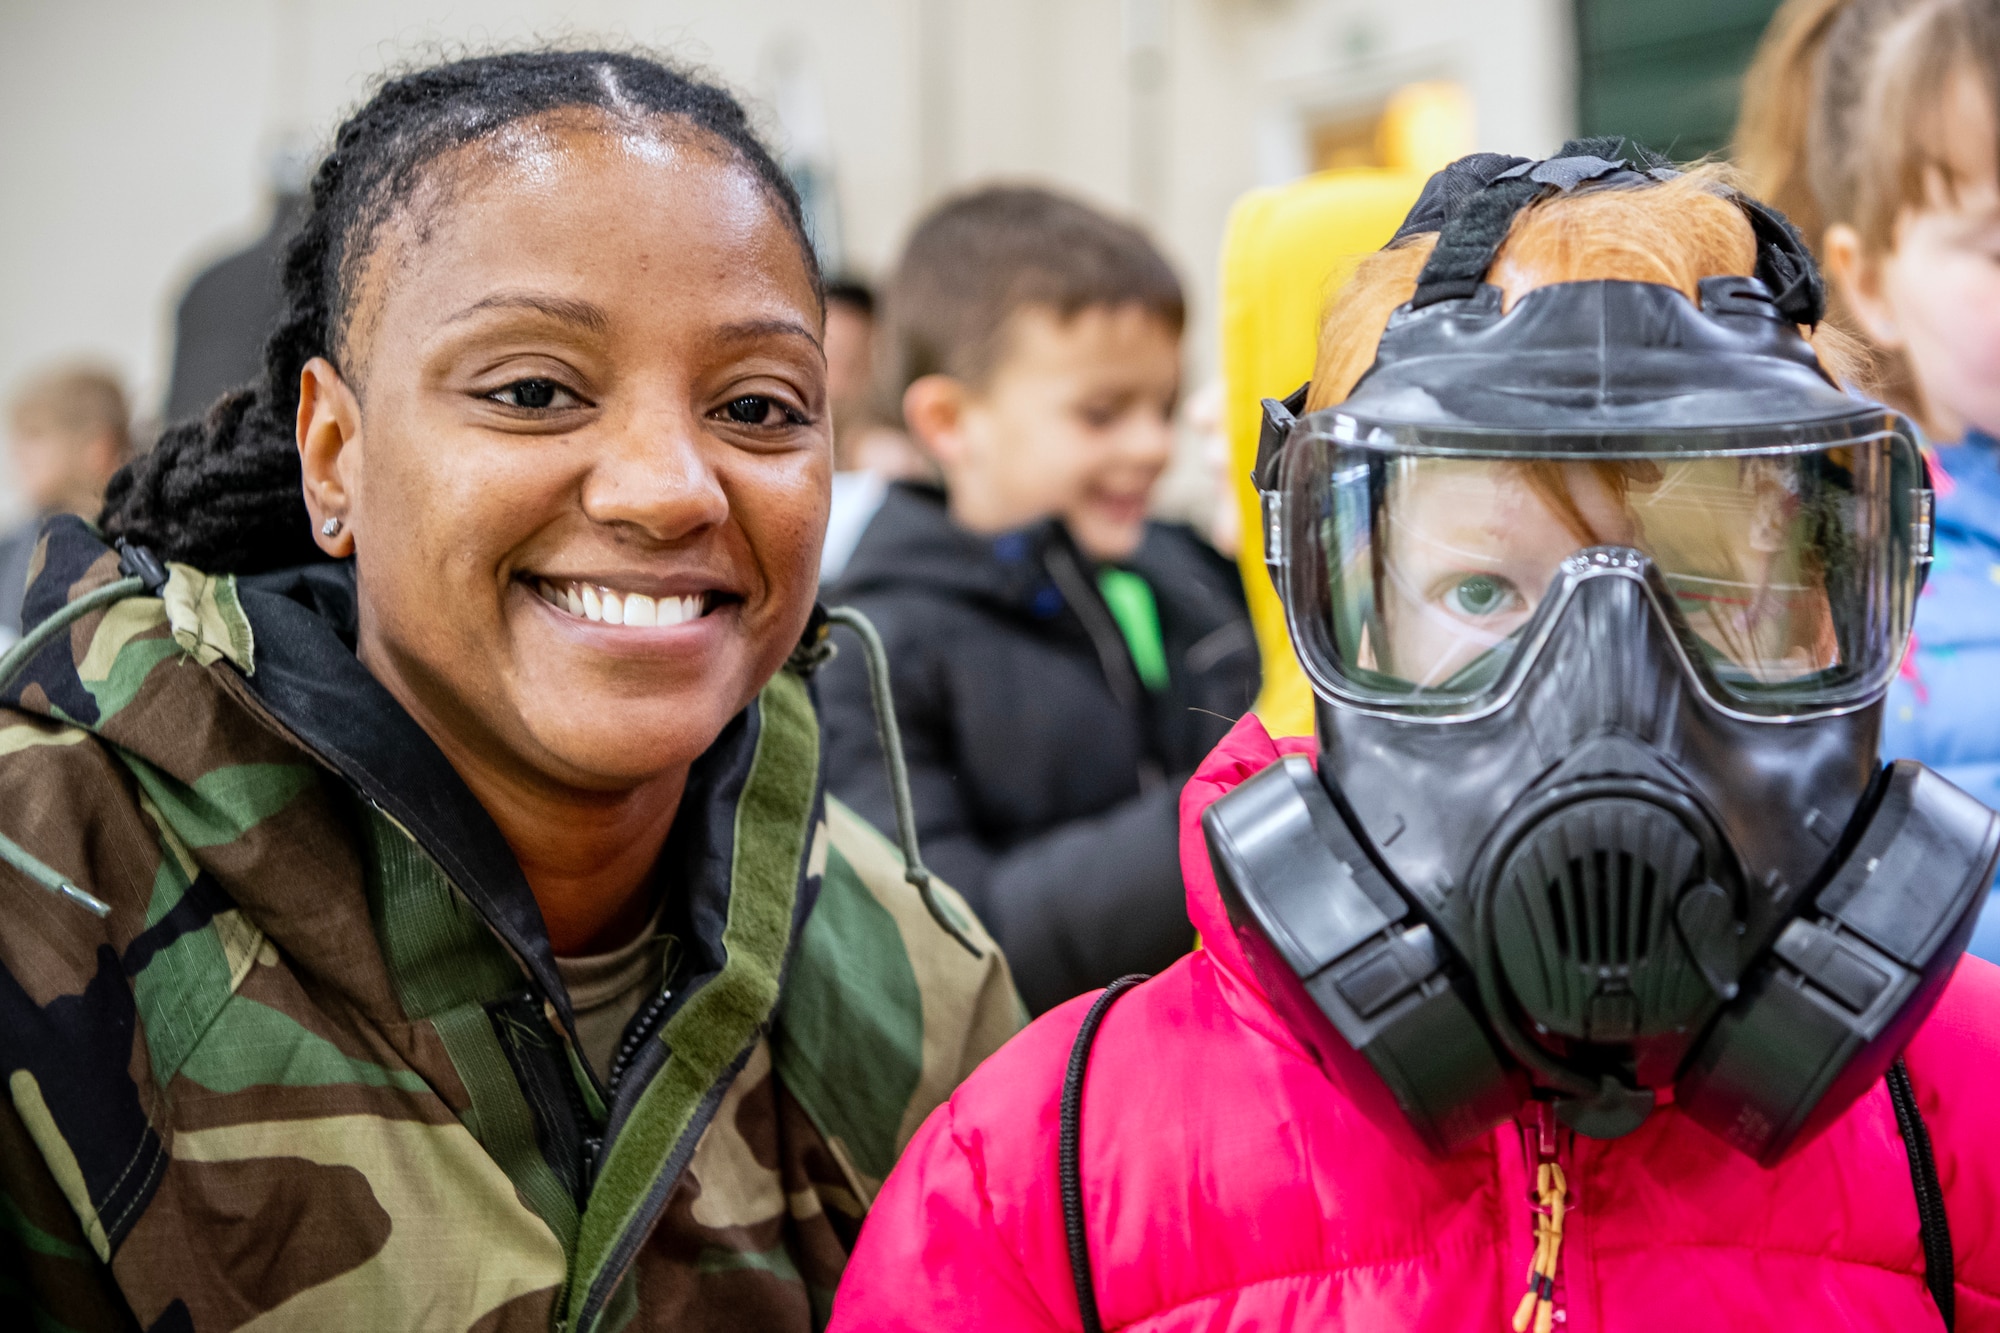 U.S. Air Force Staff Sgt. Akendra Brown, left, 423d Civil Engineer Squadron emergency management NCO in charge of training, poses for a photo with a Alconbury Elementary School student during Camp Kudos at RAF Alconbury, England, April 14, 2023. The camp gave students the opportunity to experience and learn about various aspects of deployment preparation and the wing mission. (U.S. Air Force photo by Staff Sgt. Eugene Oliver)